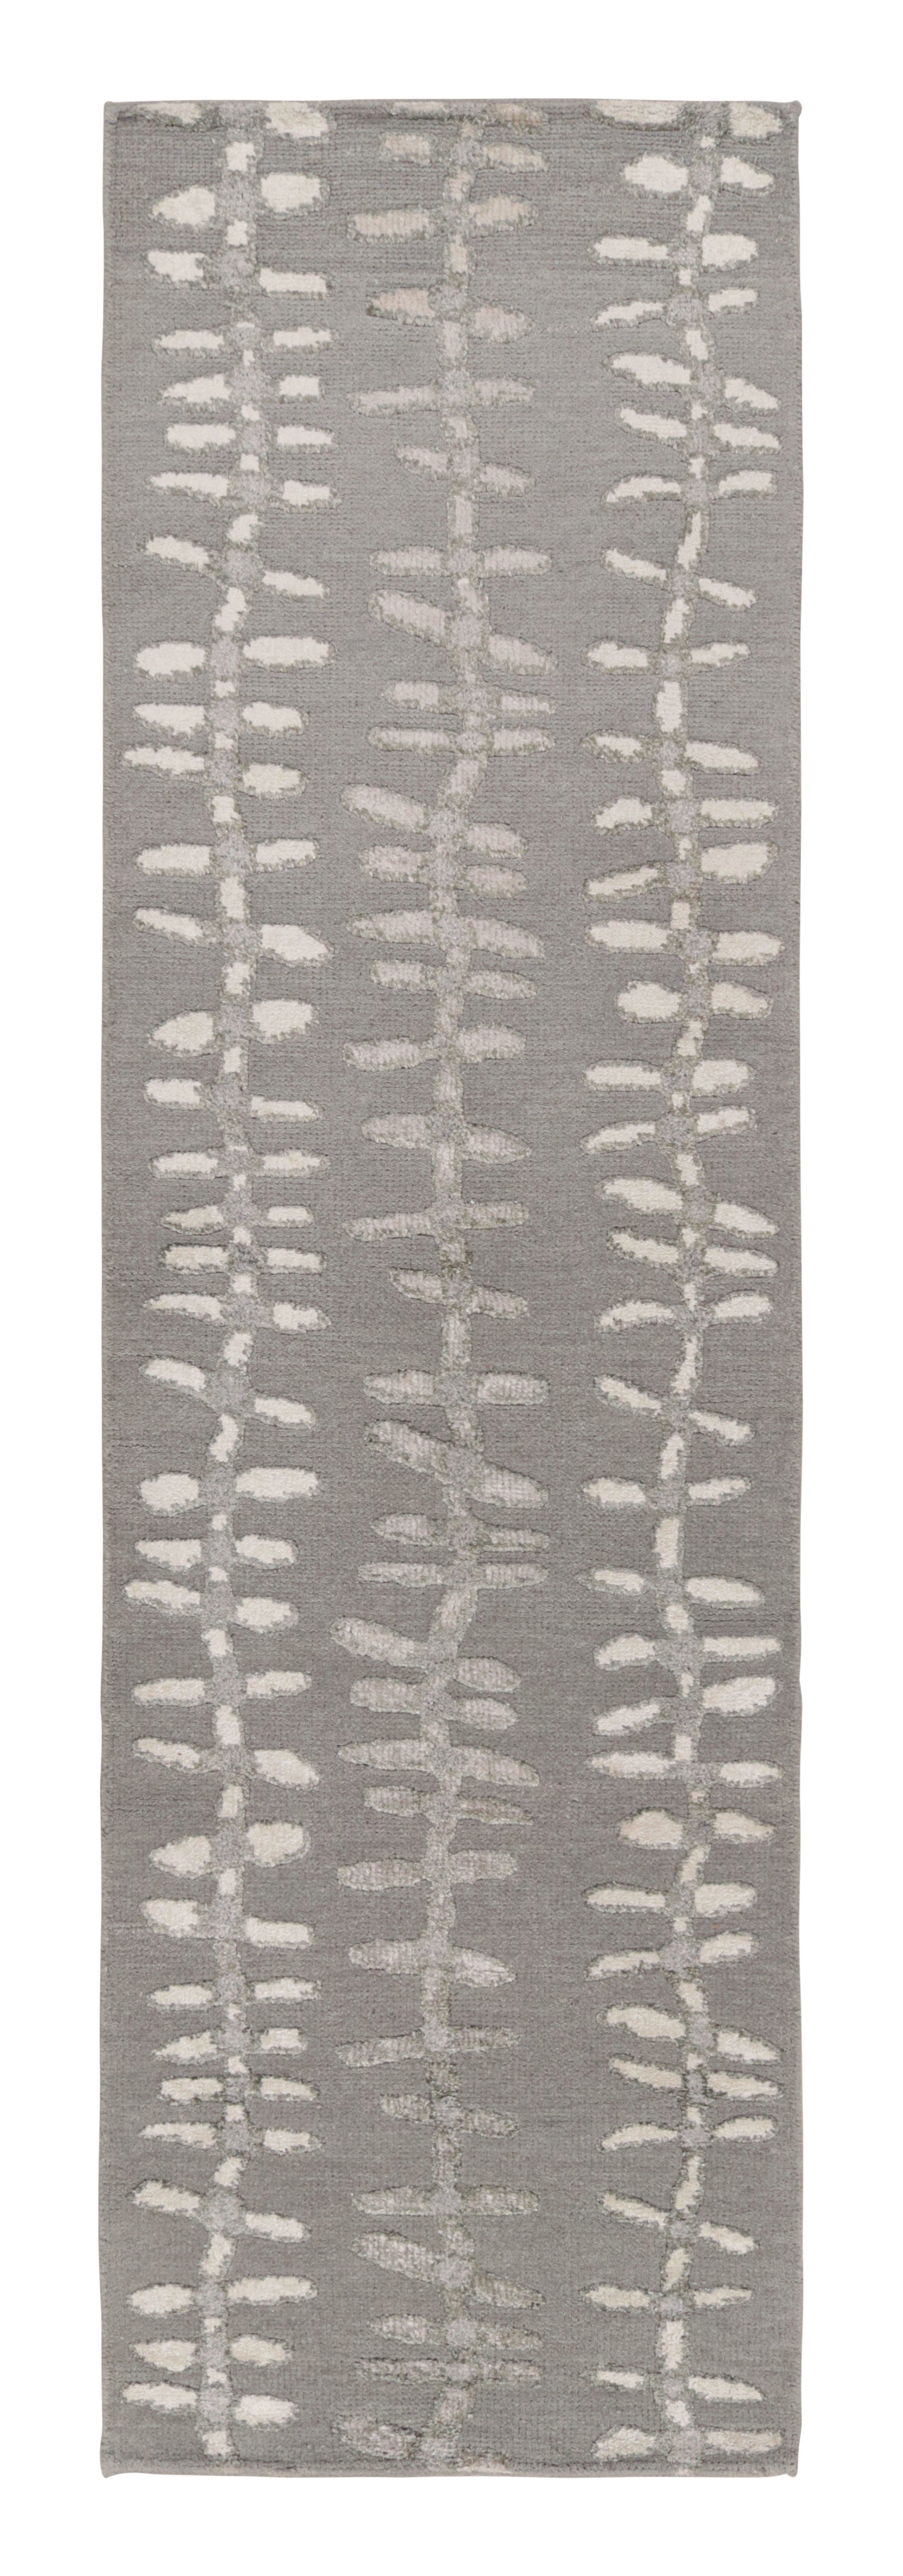 Rug & Kilim’s Scandinavian Runner Rug in Silver-Gray Tones with Floral Patterns 